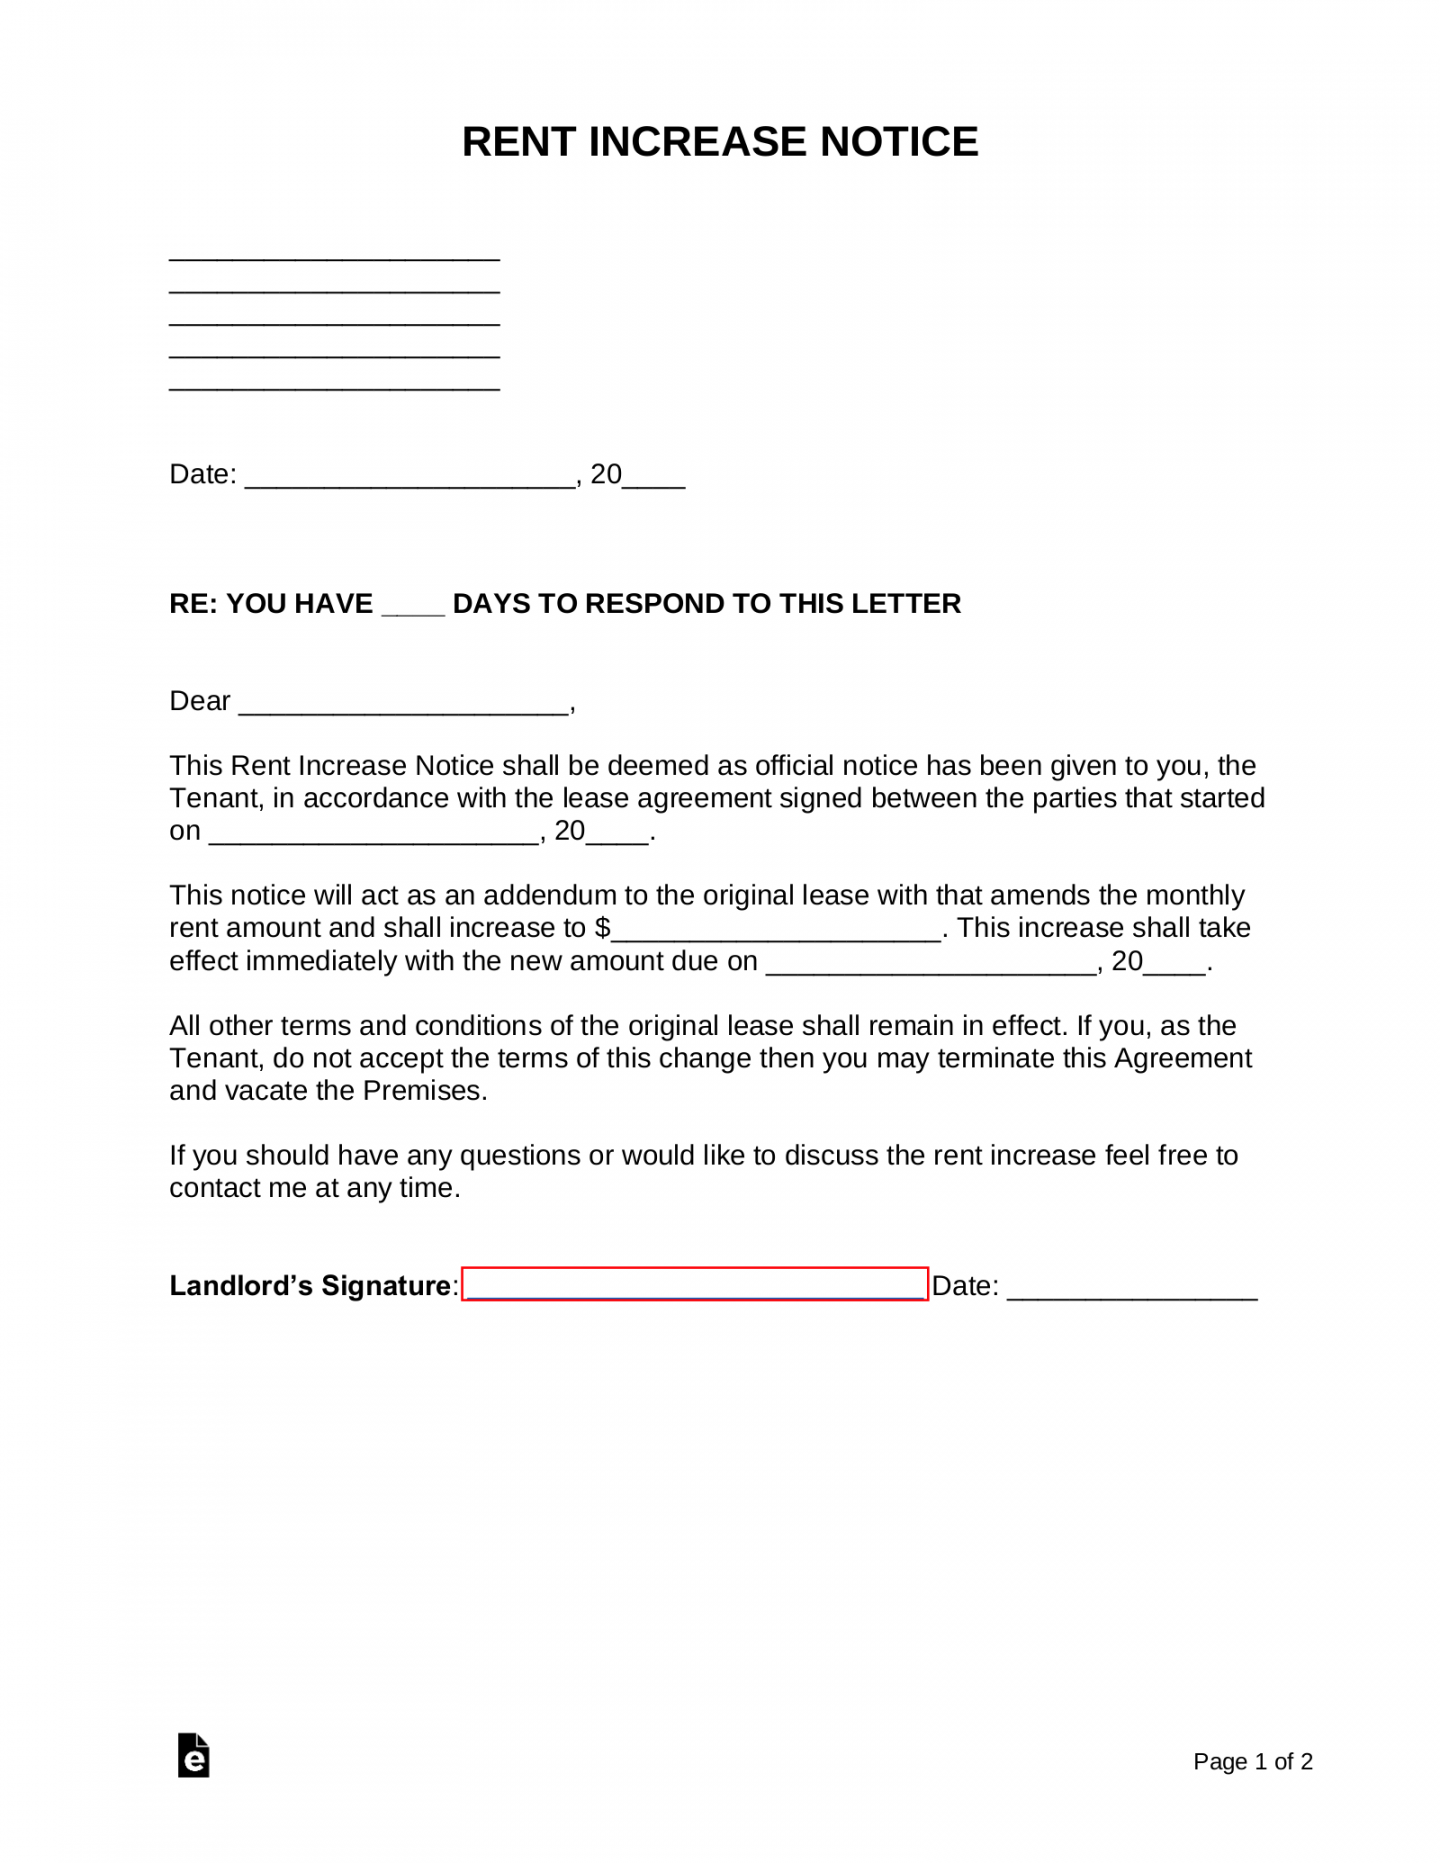 Free Rent Increase Notice - with Sample - PDF  Word – eForms - FREE Printables - Free Printable Rent Increase Notice